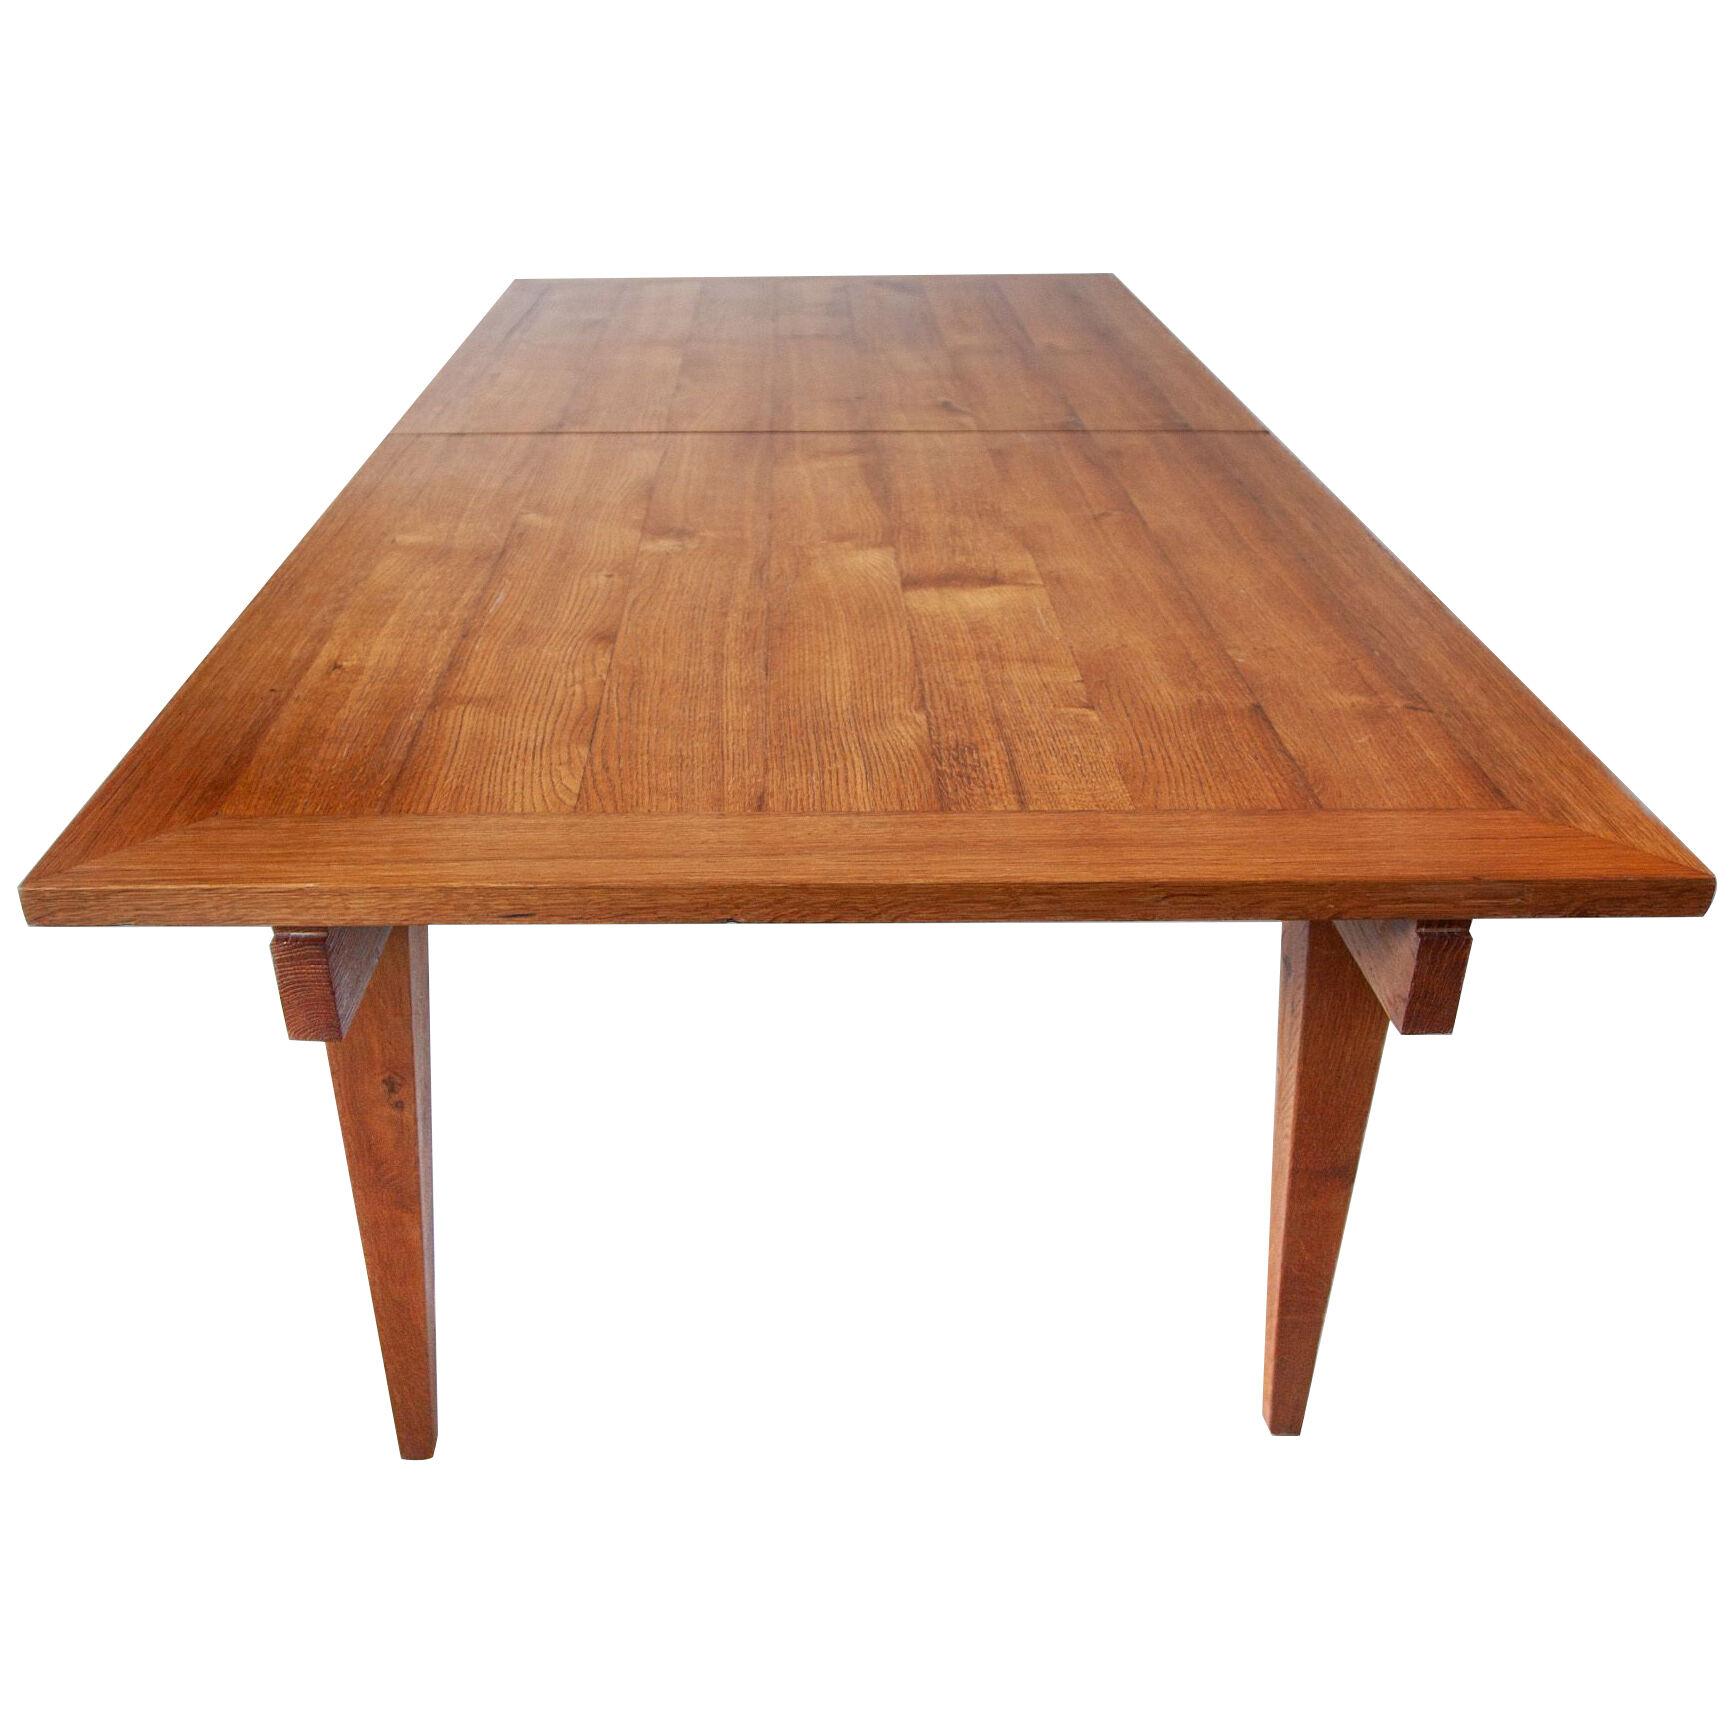 Large De Coene 12 Persons Dining table in Oak 1950s with Extension